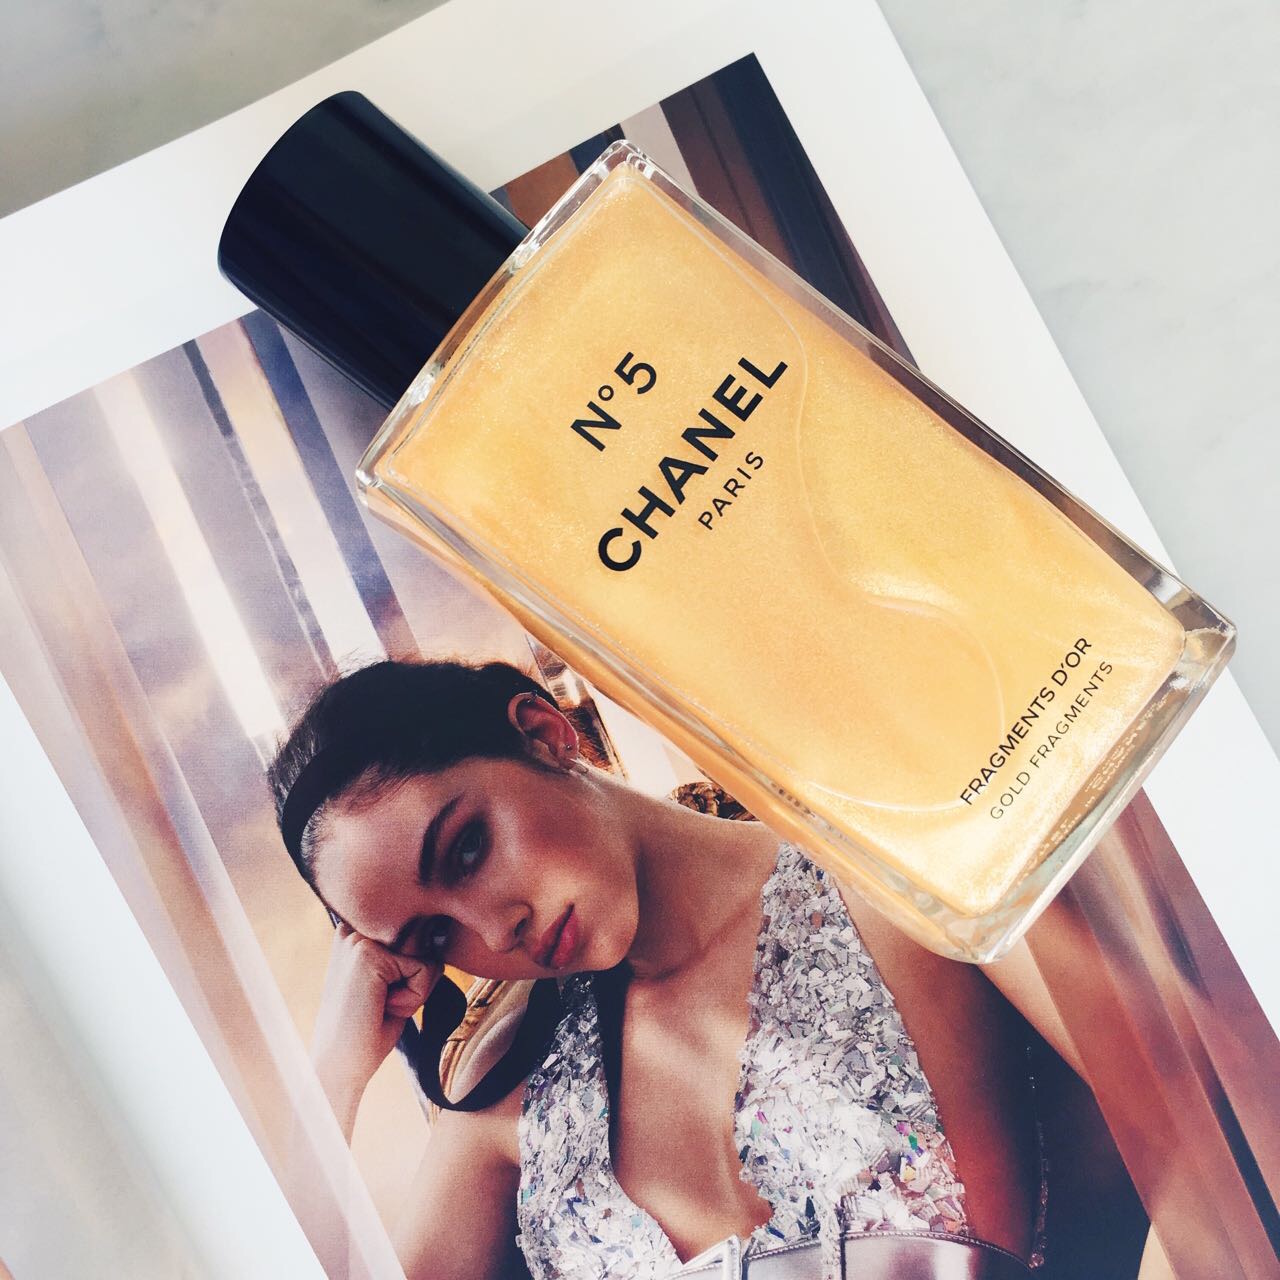 CHANEL No 5 The Body Oil - Reviews